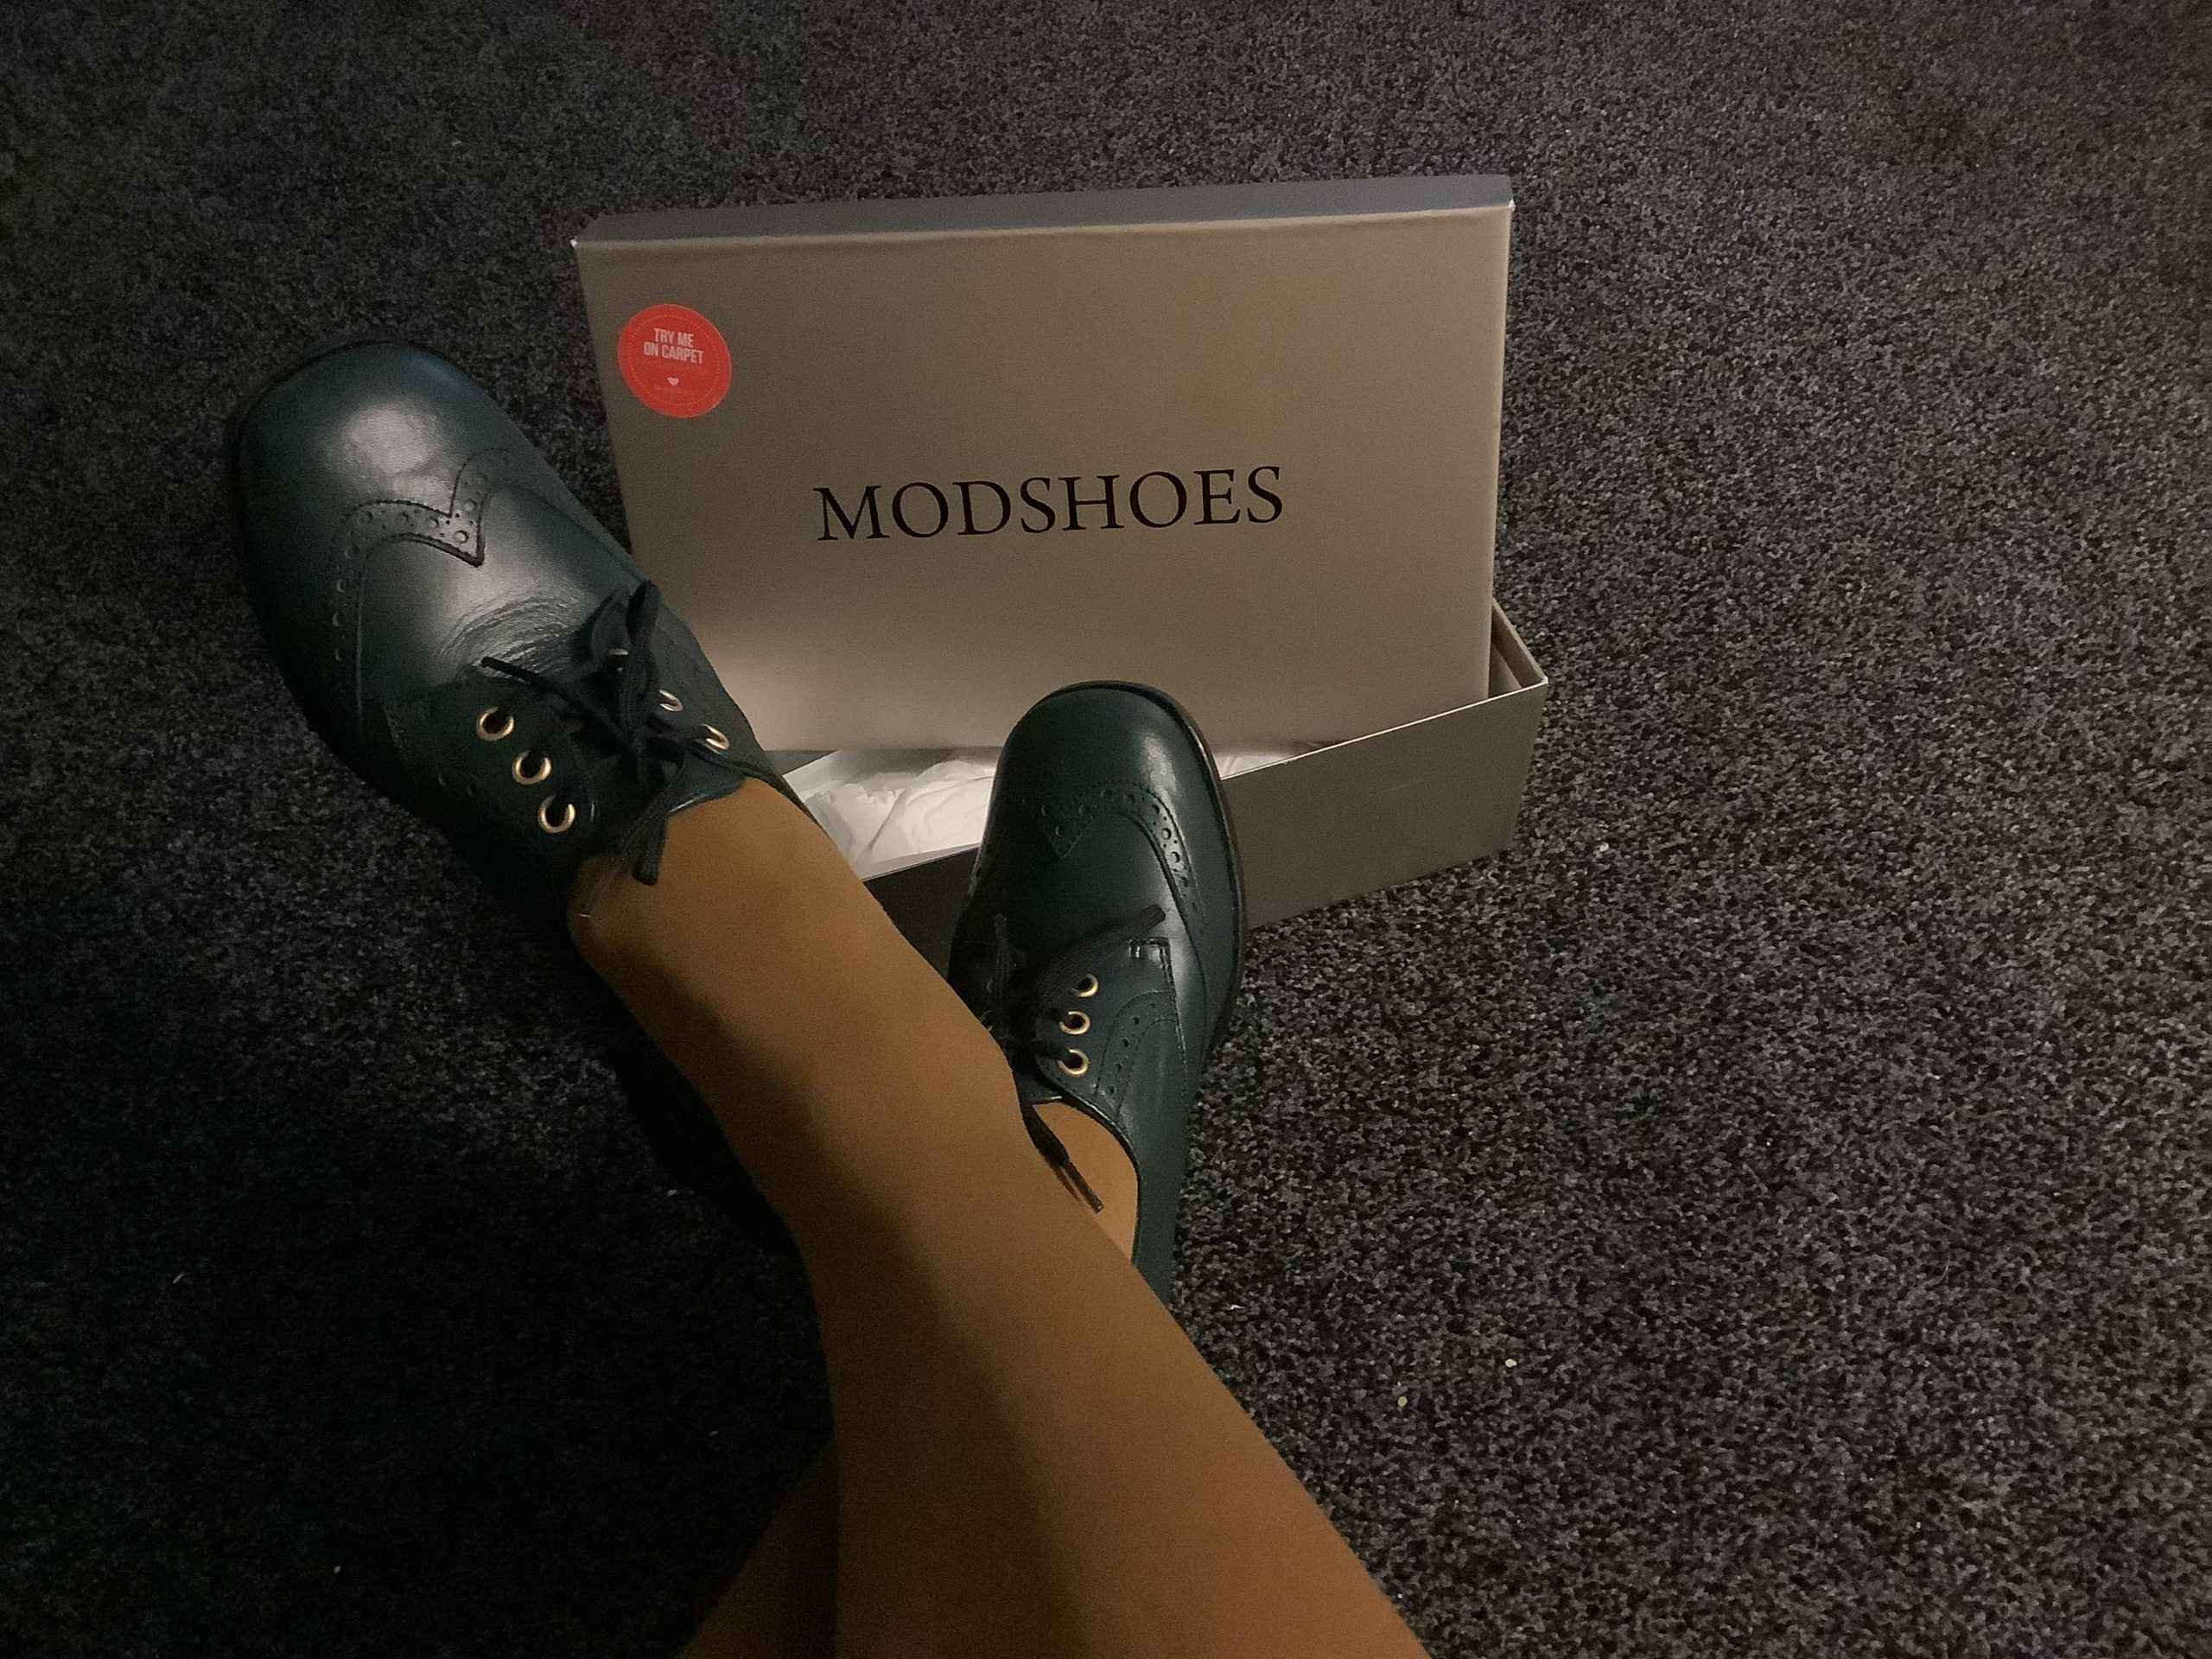 All Reviews For Modshoes Shoes – Mod Shoes